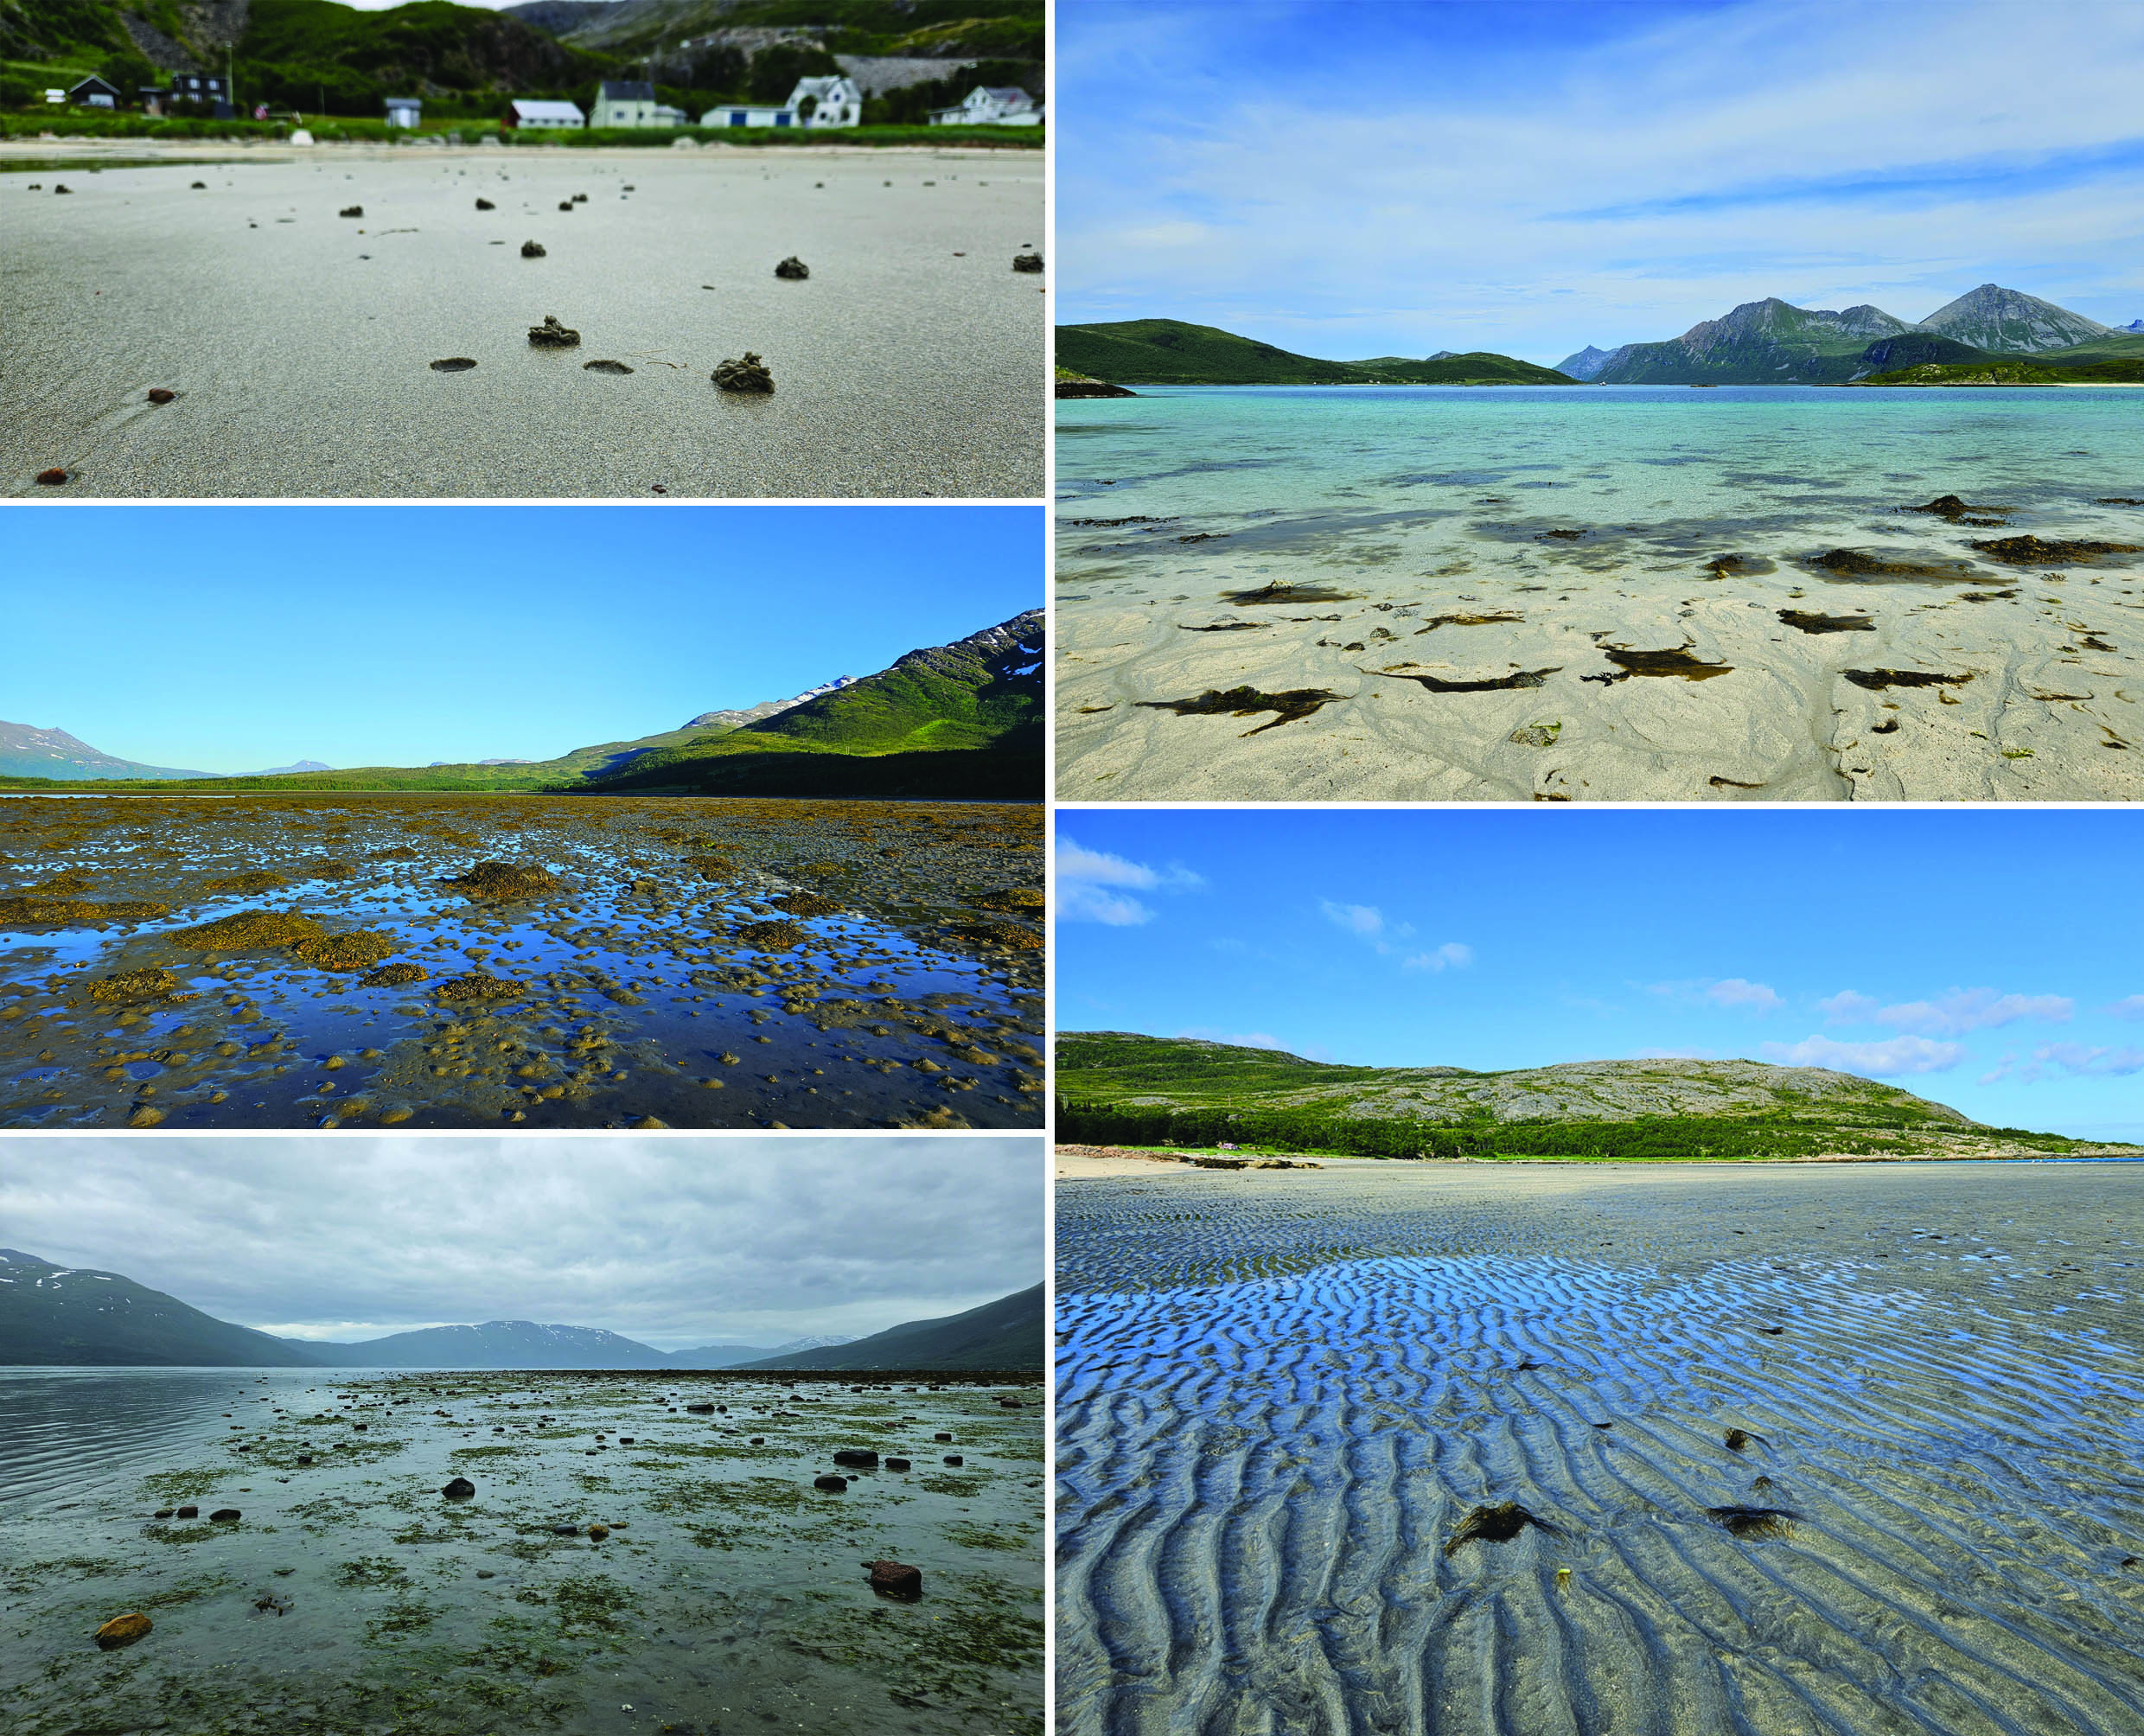 a collage of five images showing mudflats or sandy beaches in the intertidal zone